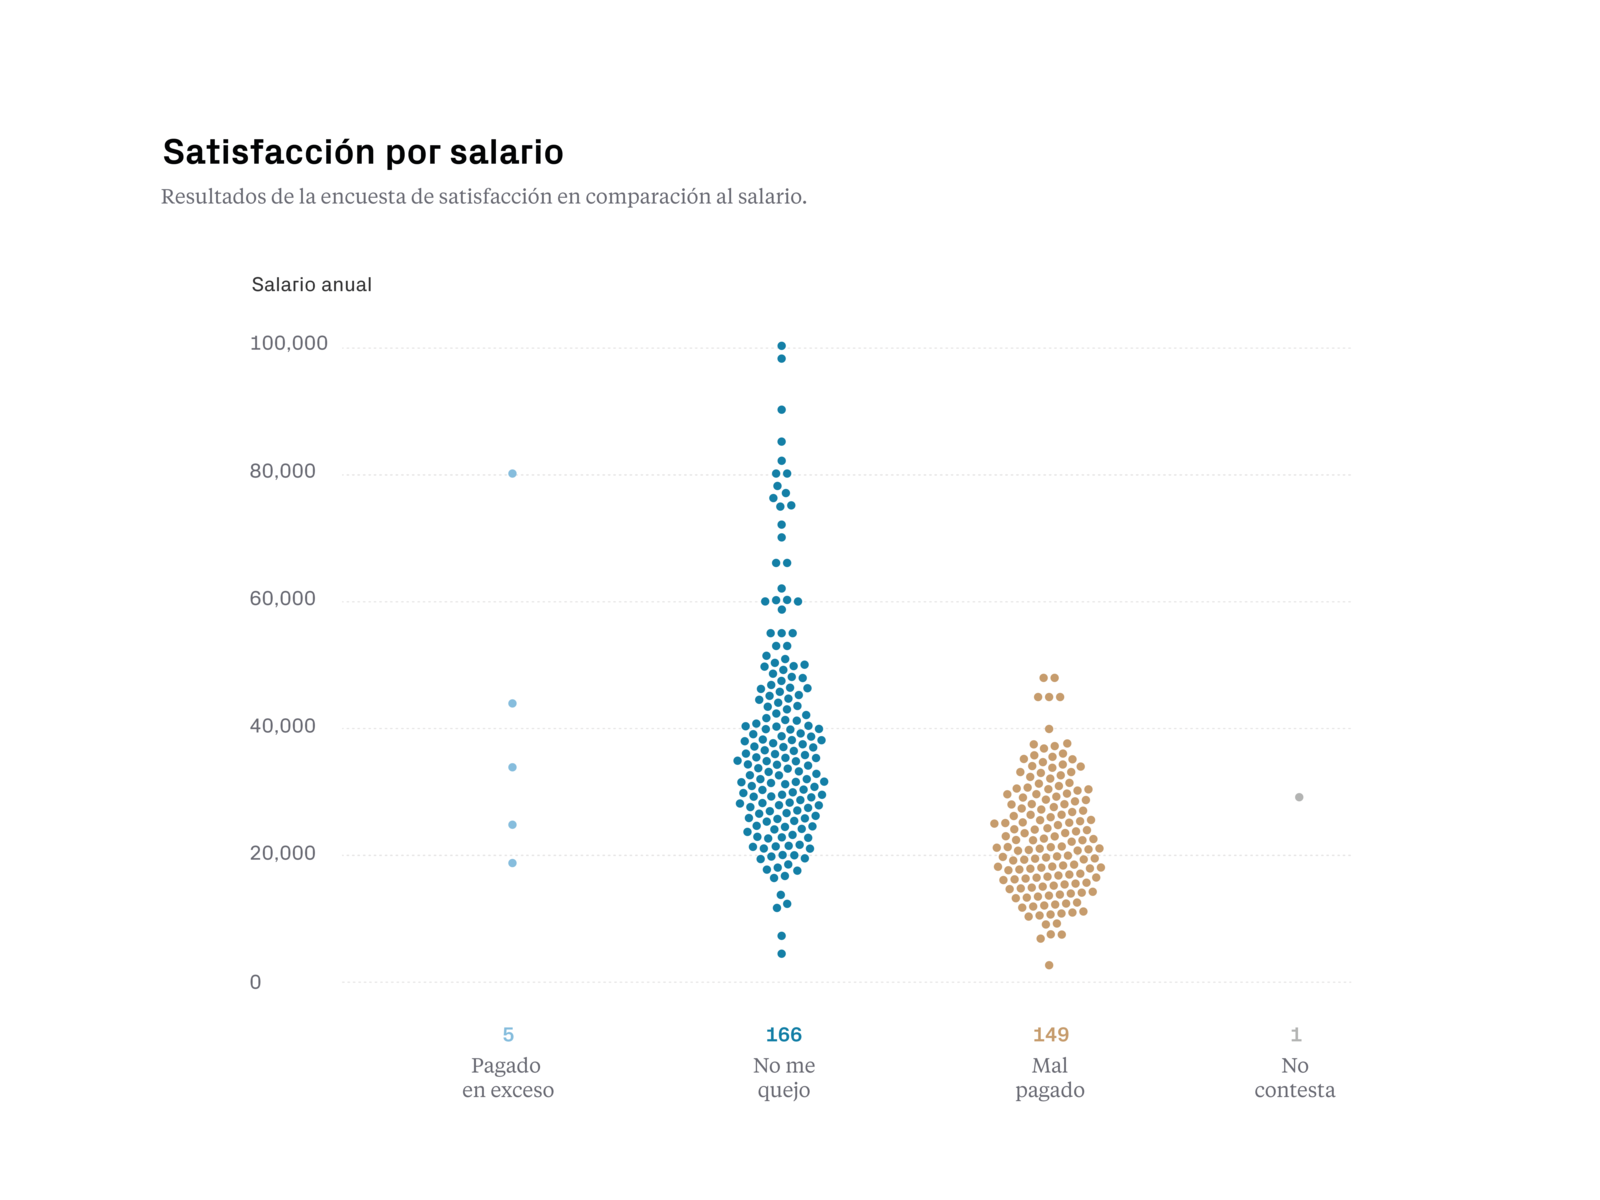 Data Visualization about salaries by Gemma Busquets on Dribbble